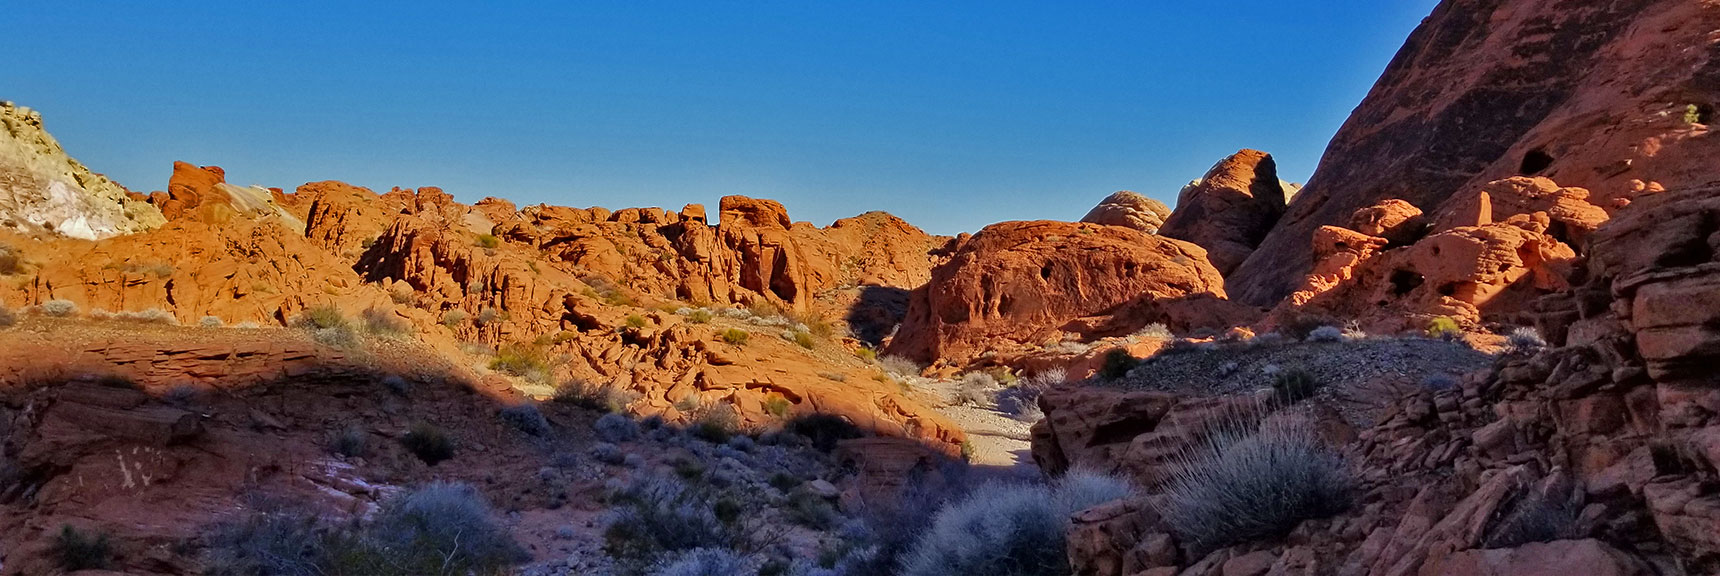 Descending the Northern Canyon Wash Toward White Domes Loop on Prospect Trail in Valley of Fire State Park, Nevada